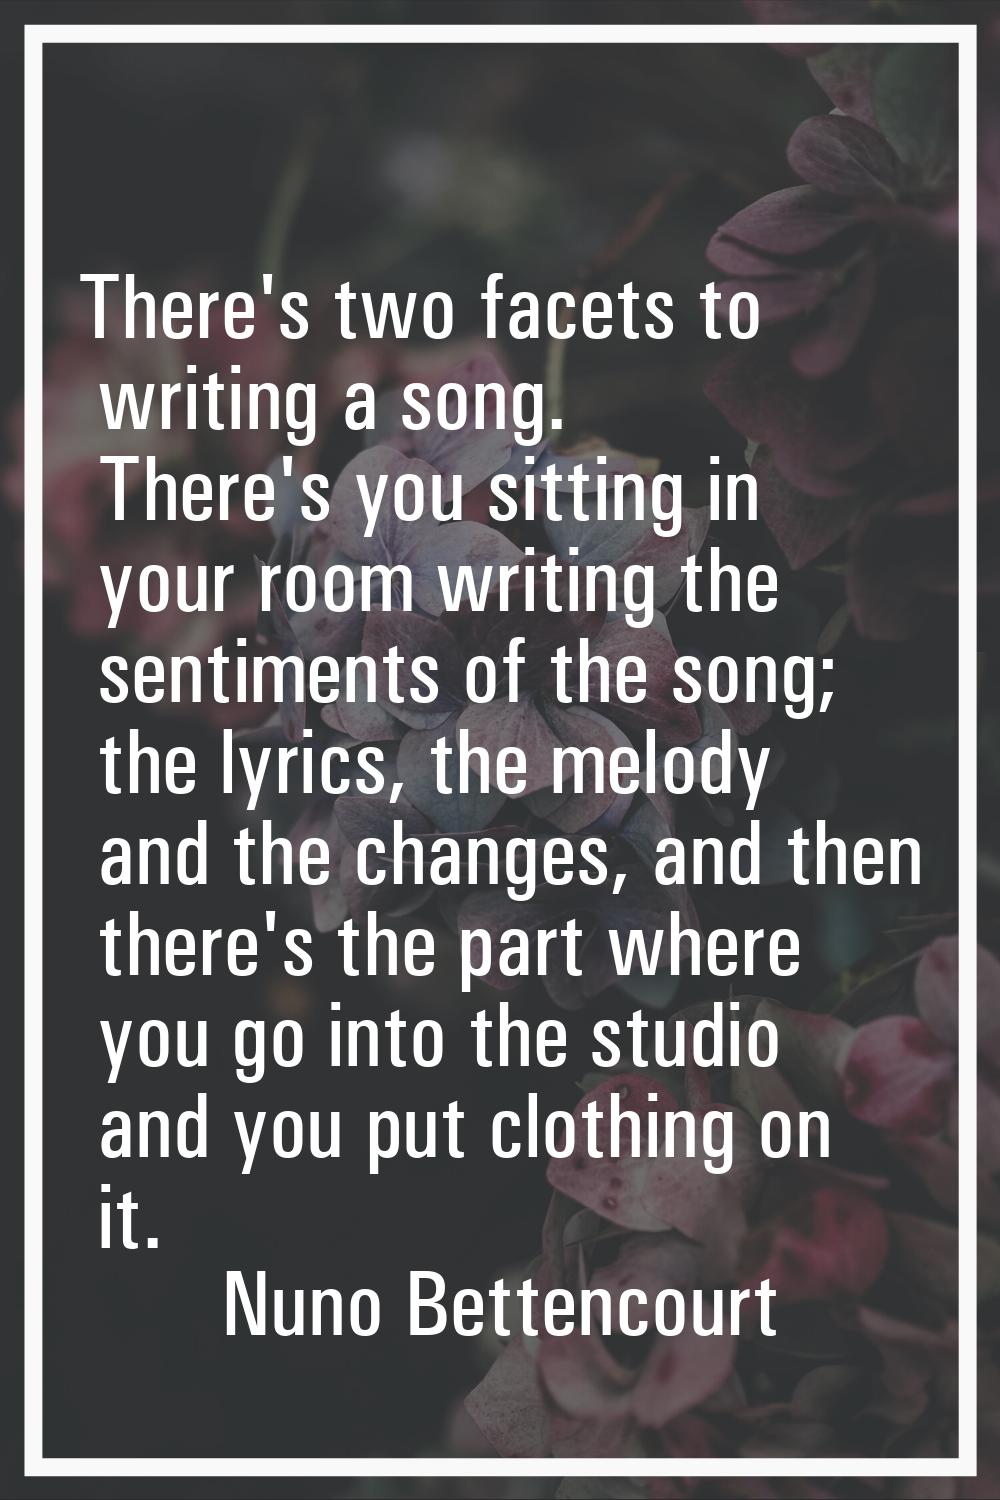 There's two facets to writing a song. There's you sitting in your room writing the sentiments of th